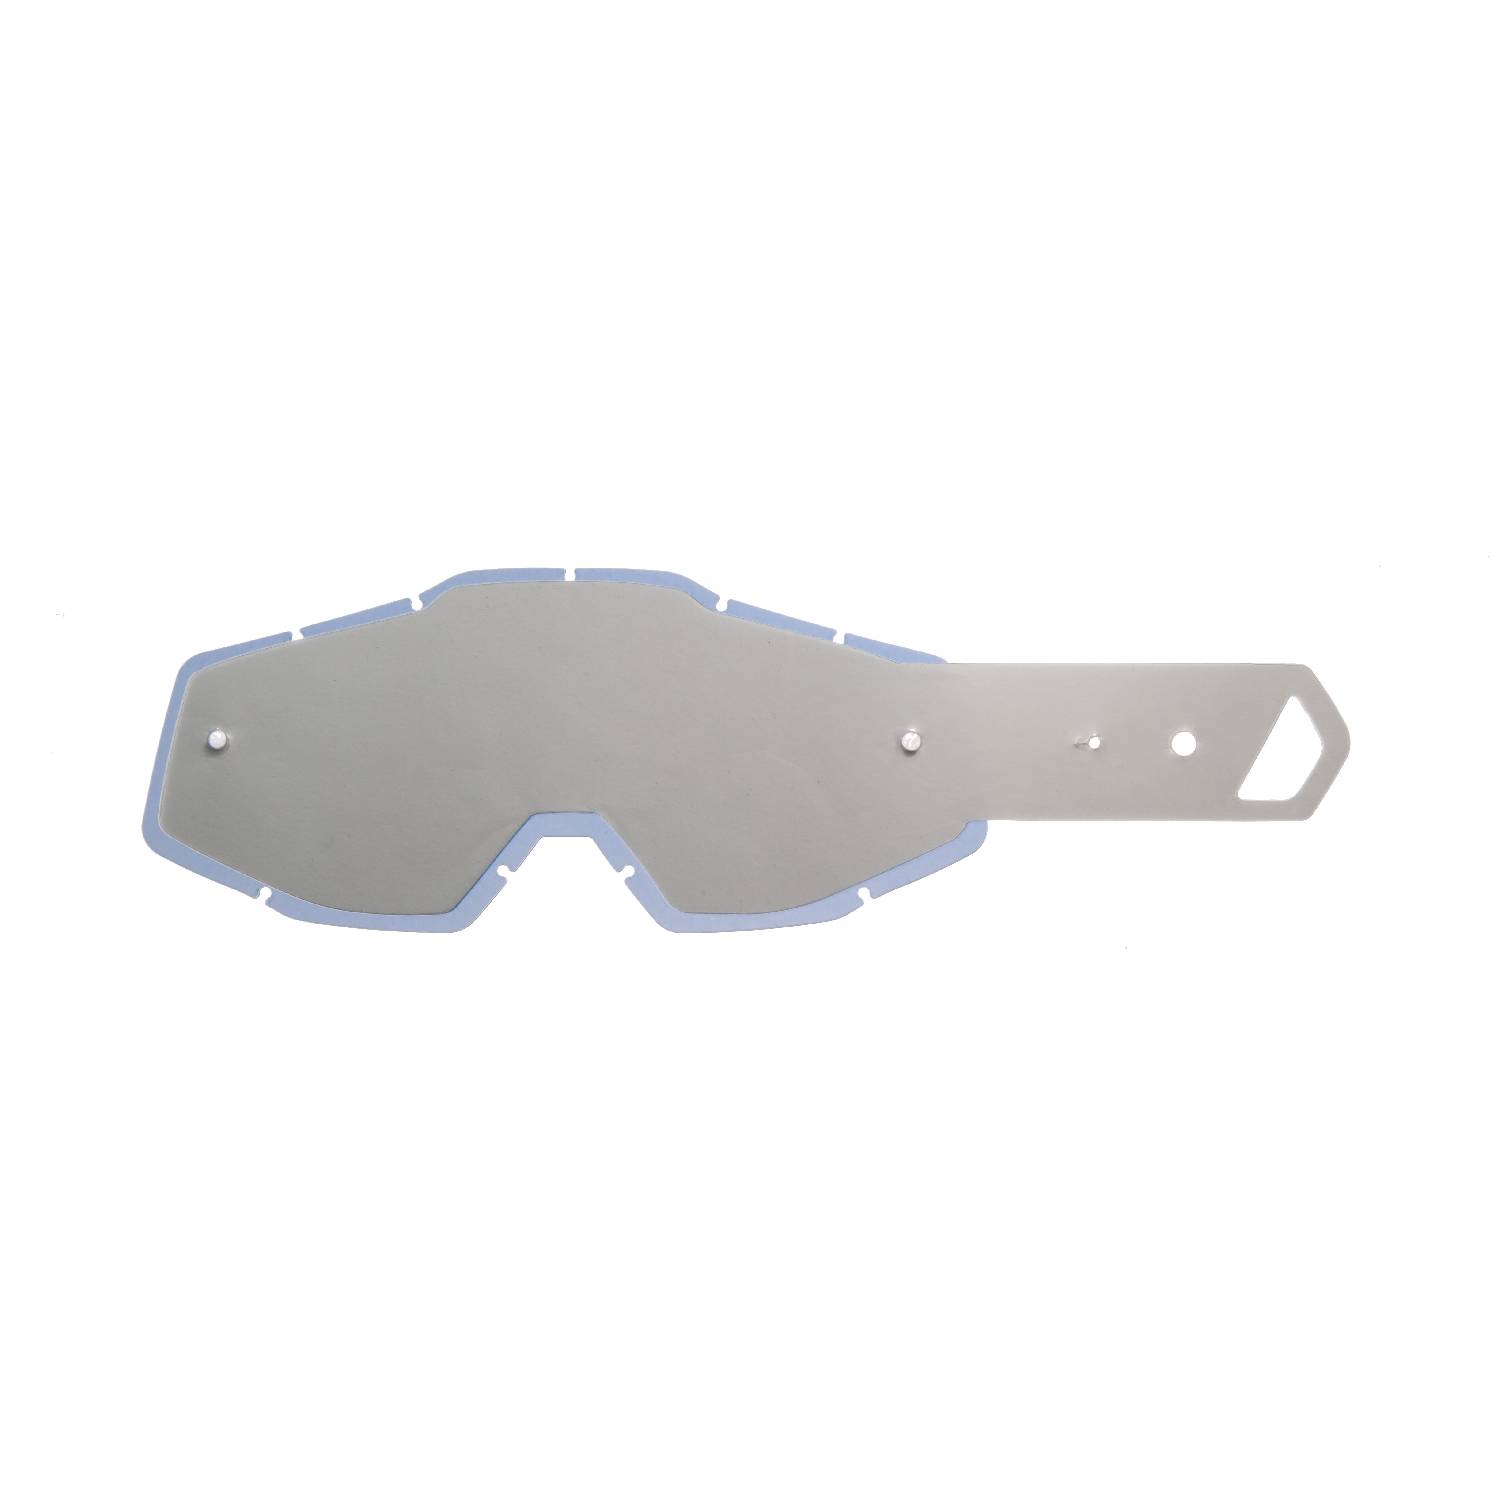 combo lenses with smokey lenses with 10 tear off compatible for 100% Racecraft / Strata / Accuri / Mercury goggle